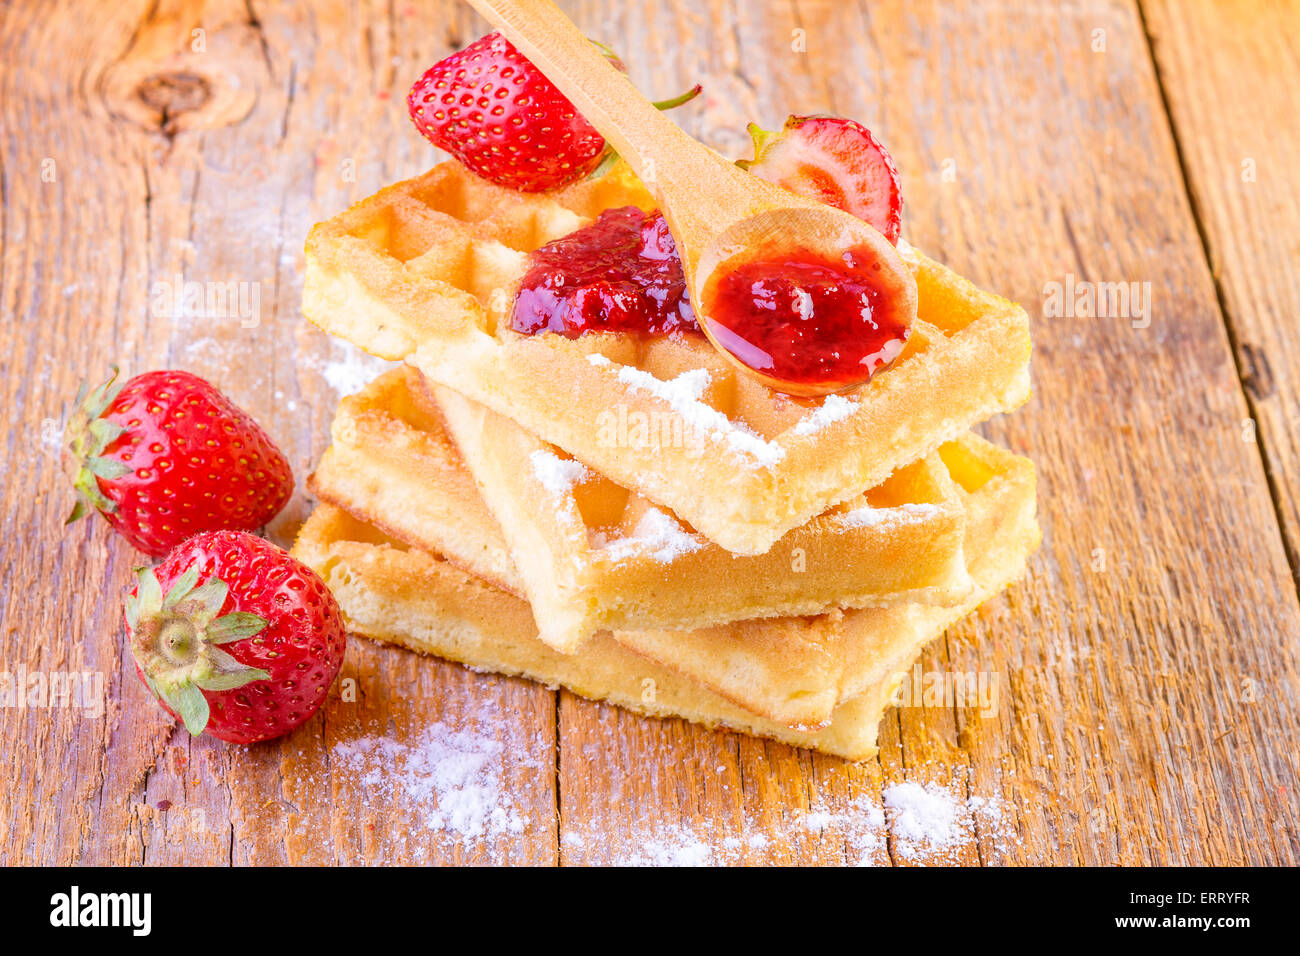 homemade waffles with strawberries maple syrup on wooden background Stock Photo